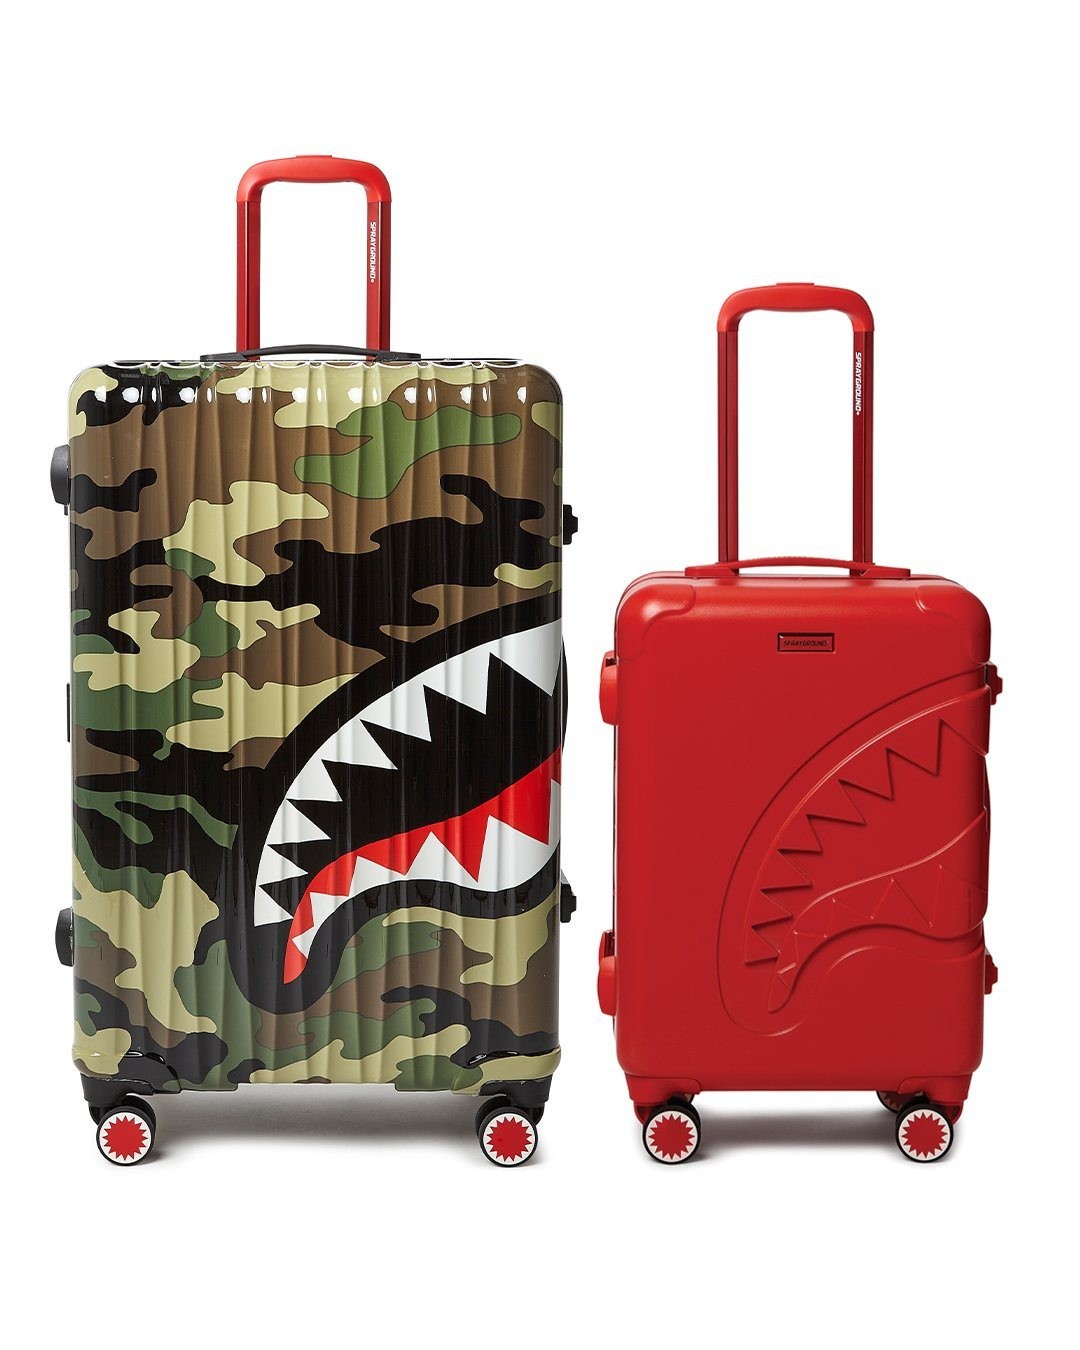 Sale Sprayground Full-Size Camo Carry-On Red Luggage Bundle Discount - -0